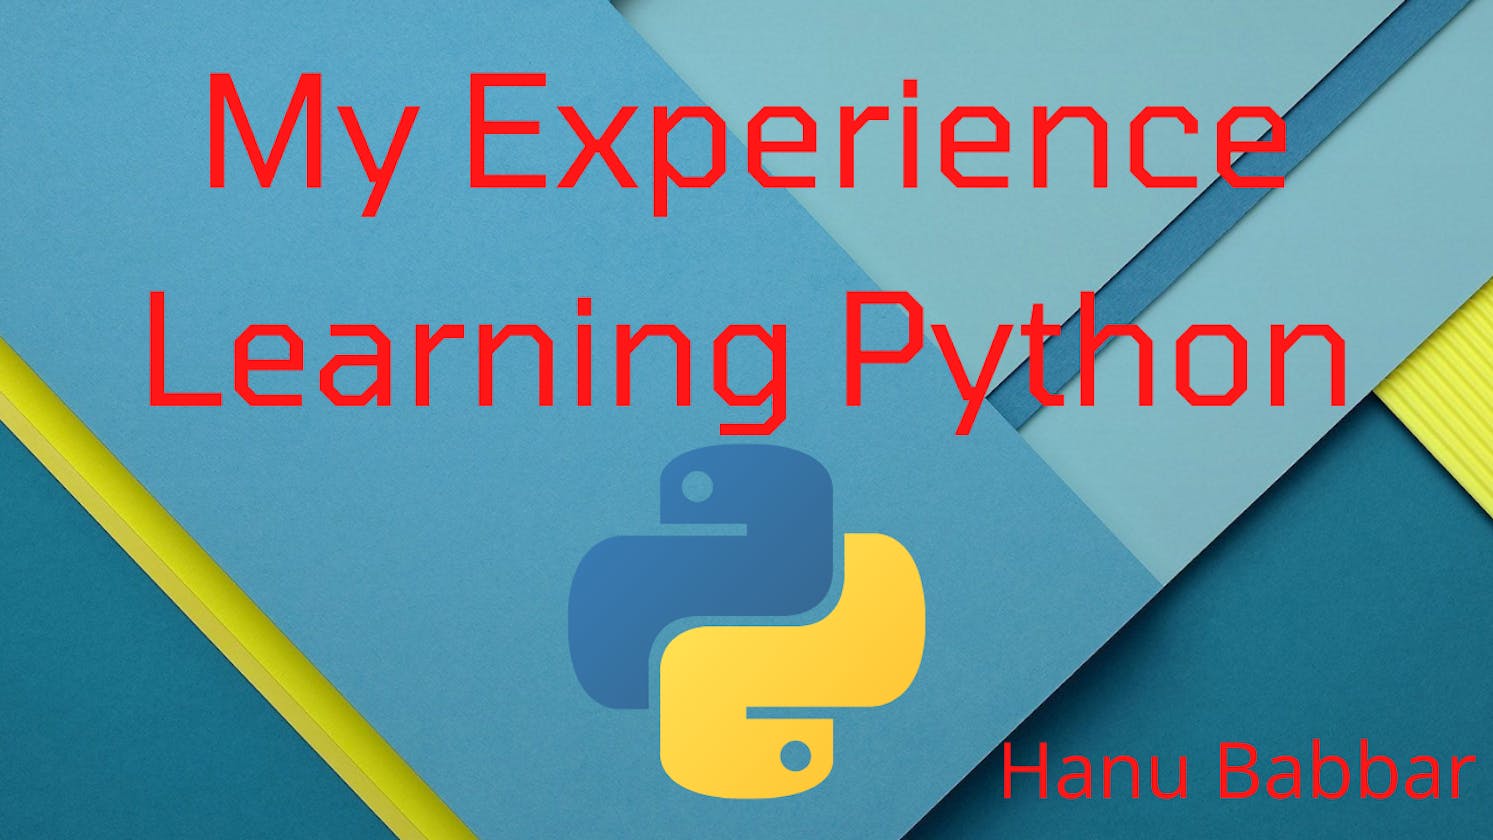 My experience learning Python as a beginner